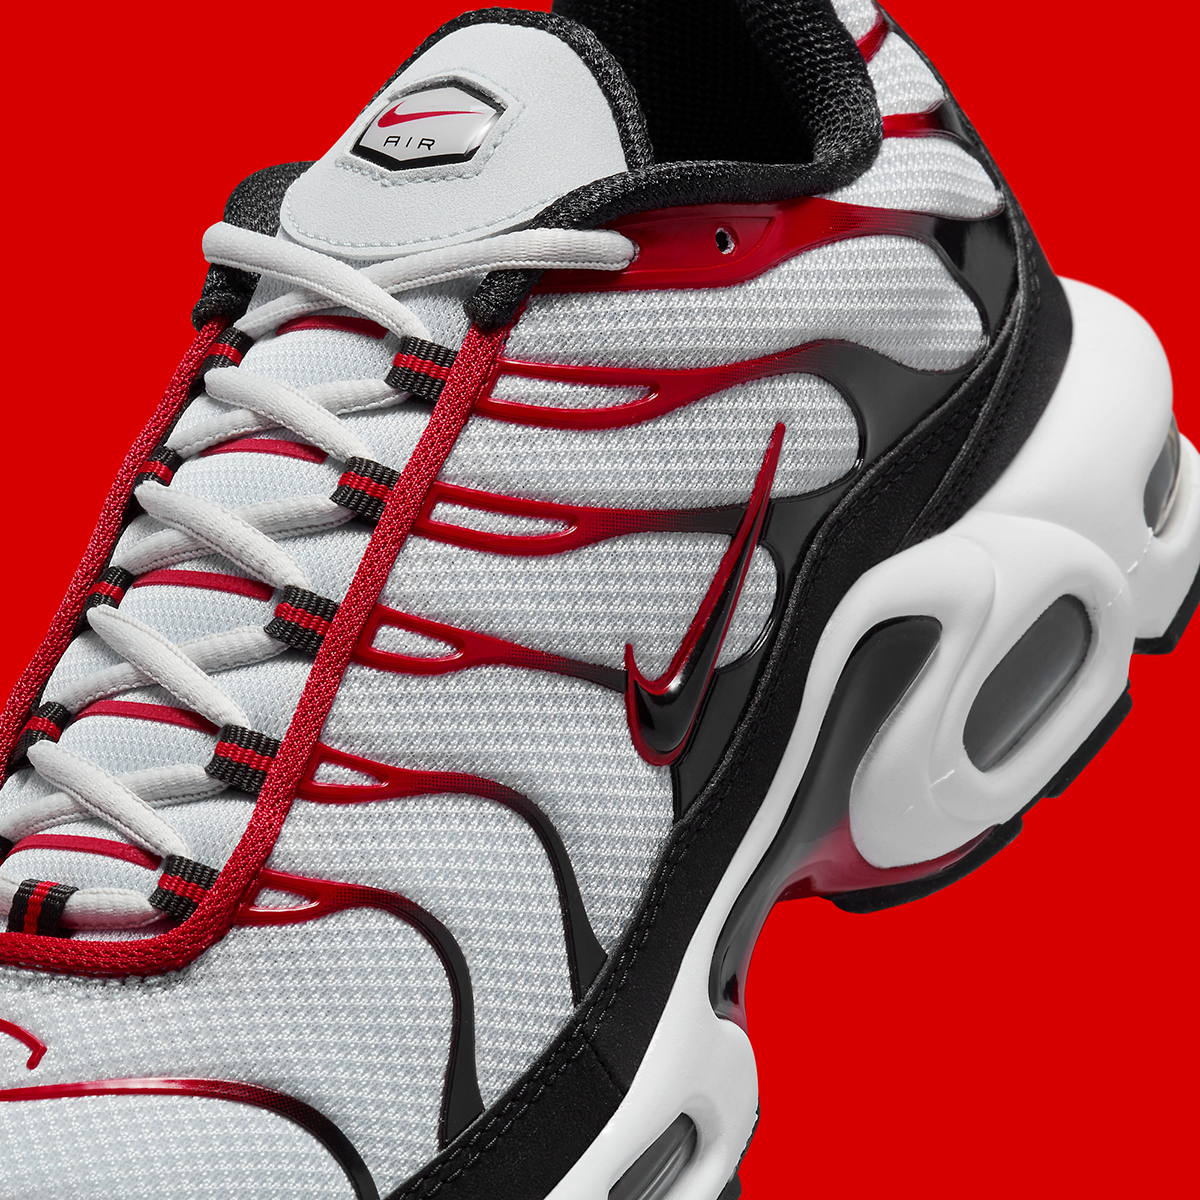 Chili Comes To A Red Hot Nike Air Max Plus